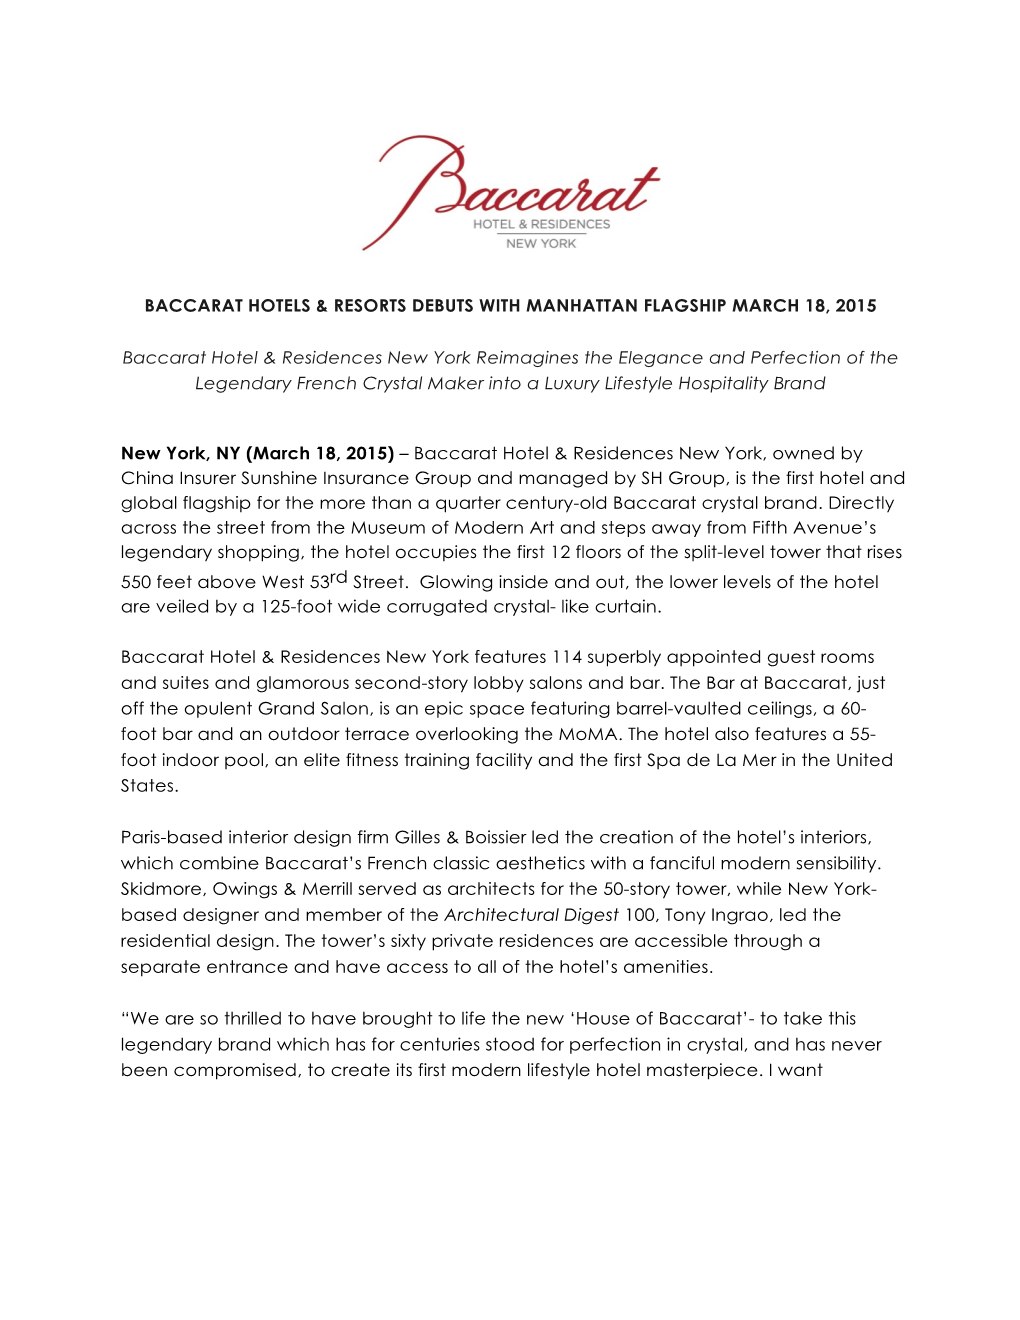 Baccarat Hotels & Resorts Debuts with Manhattan